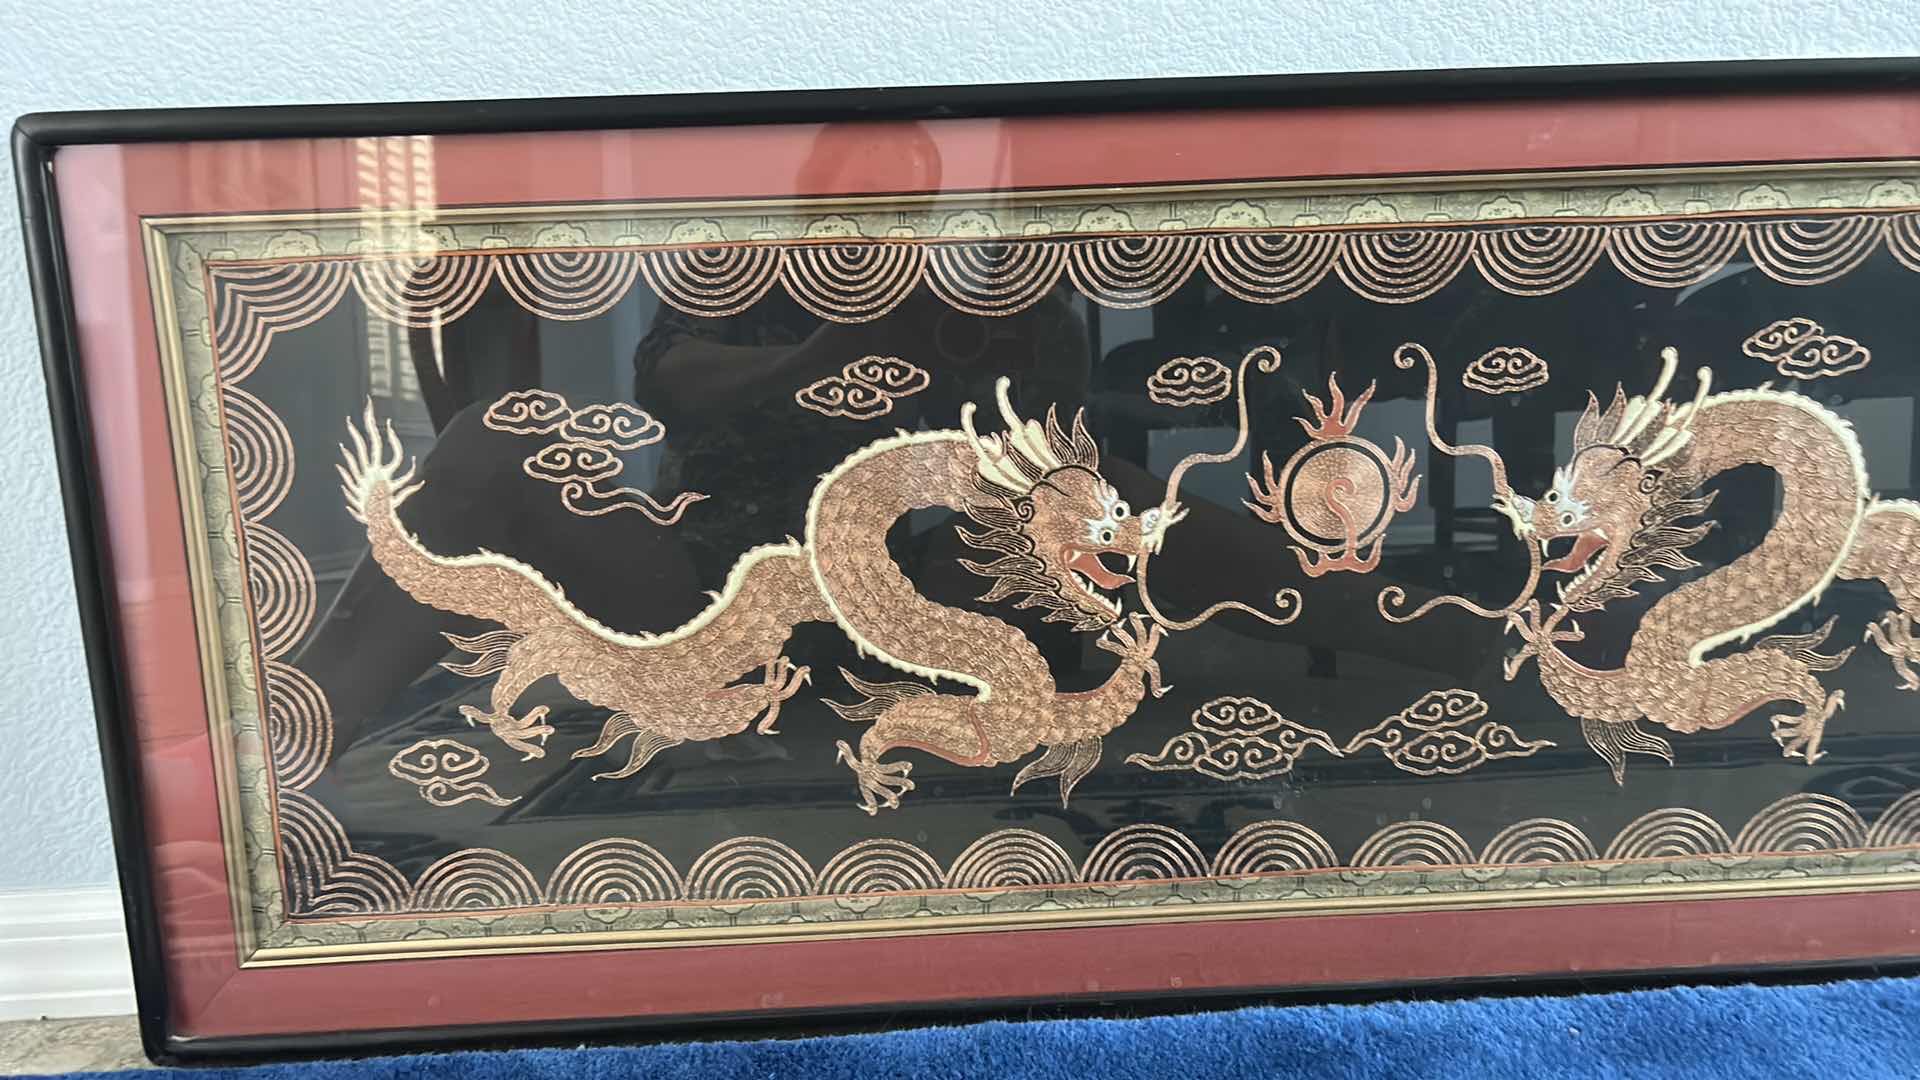 Photo 3 of ANTIQUE CHINESE TEXTILE FABRIC, DRAGONS  SILK WITH SILK THREAD HAND EMBROIDERY ARTWORK FRAMED 4’ x 19”